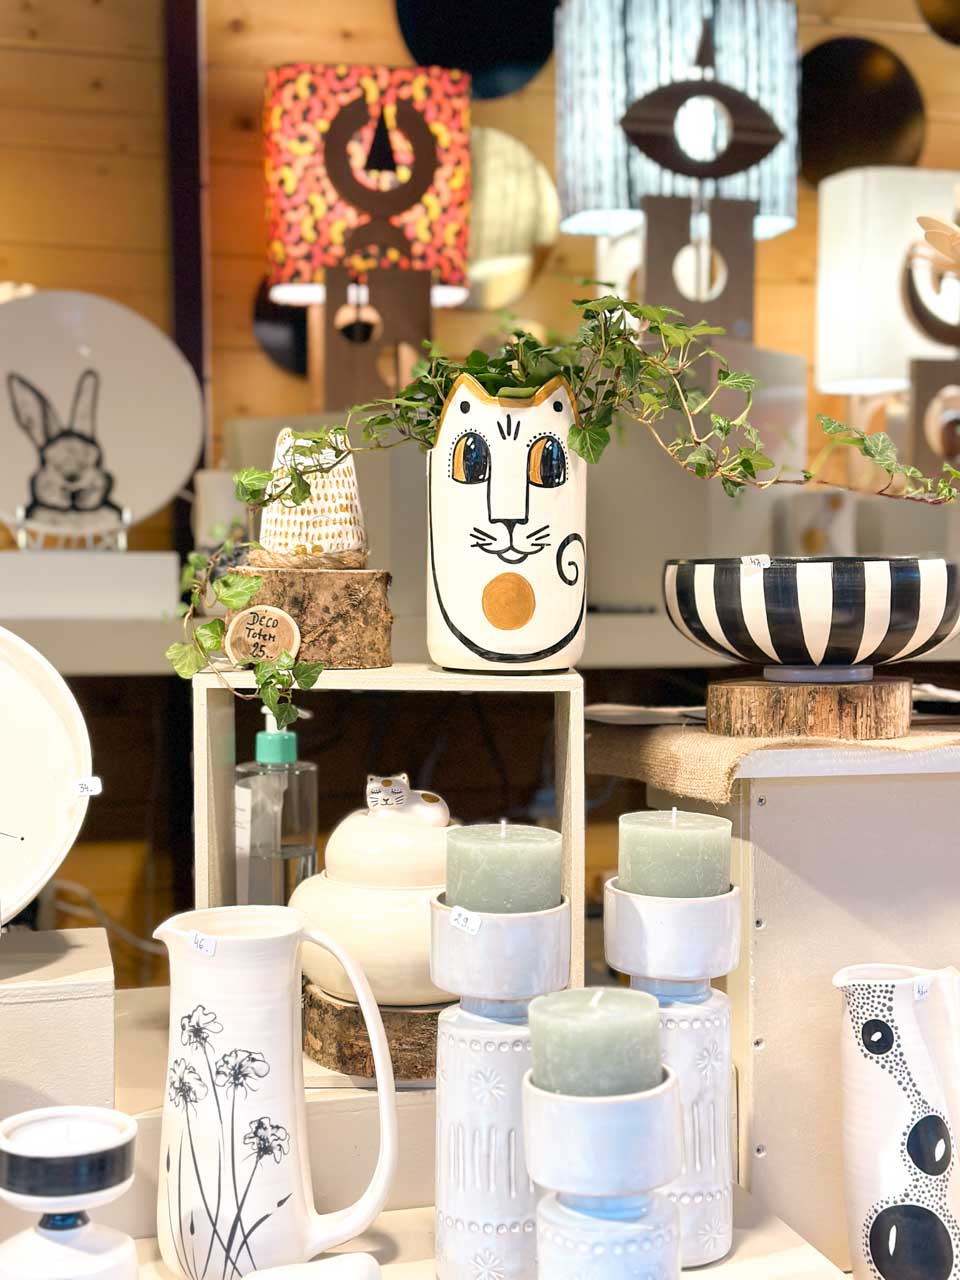 A collection of artistic pottery and candles, featuring charming animal designs, on display at a Christmas market stall in Strasbourg